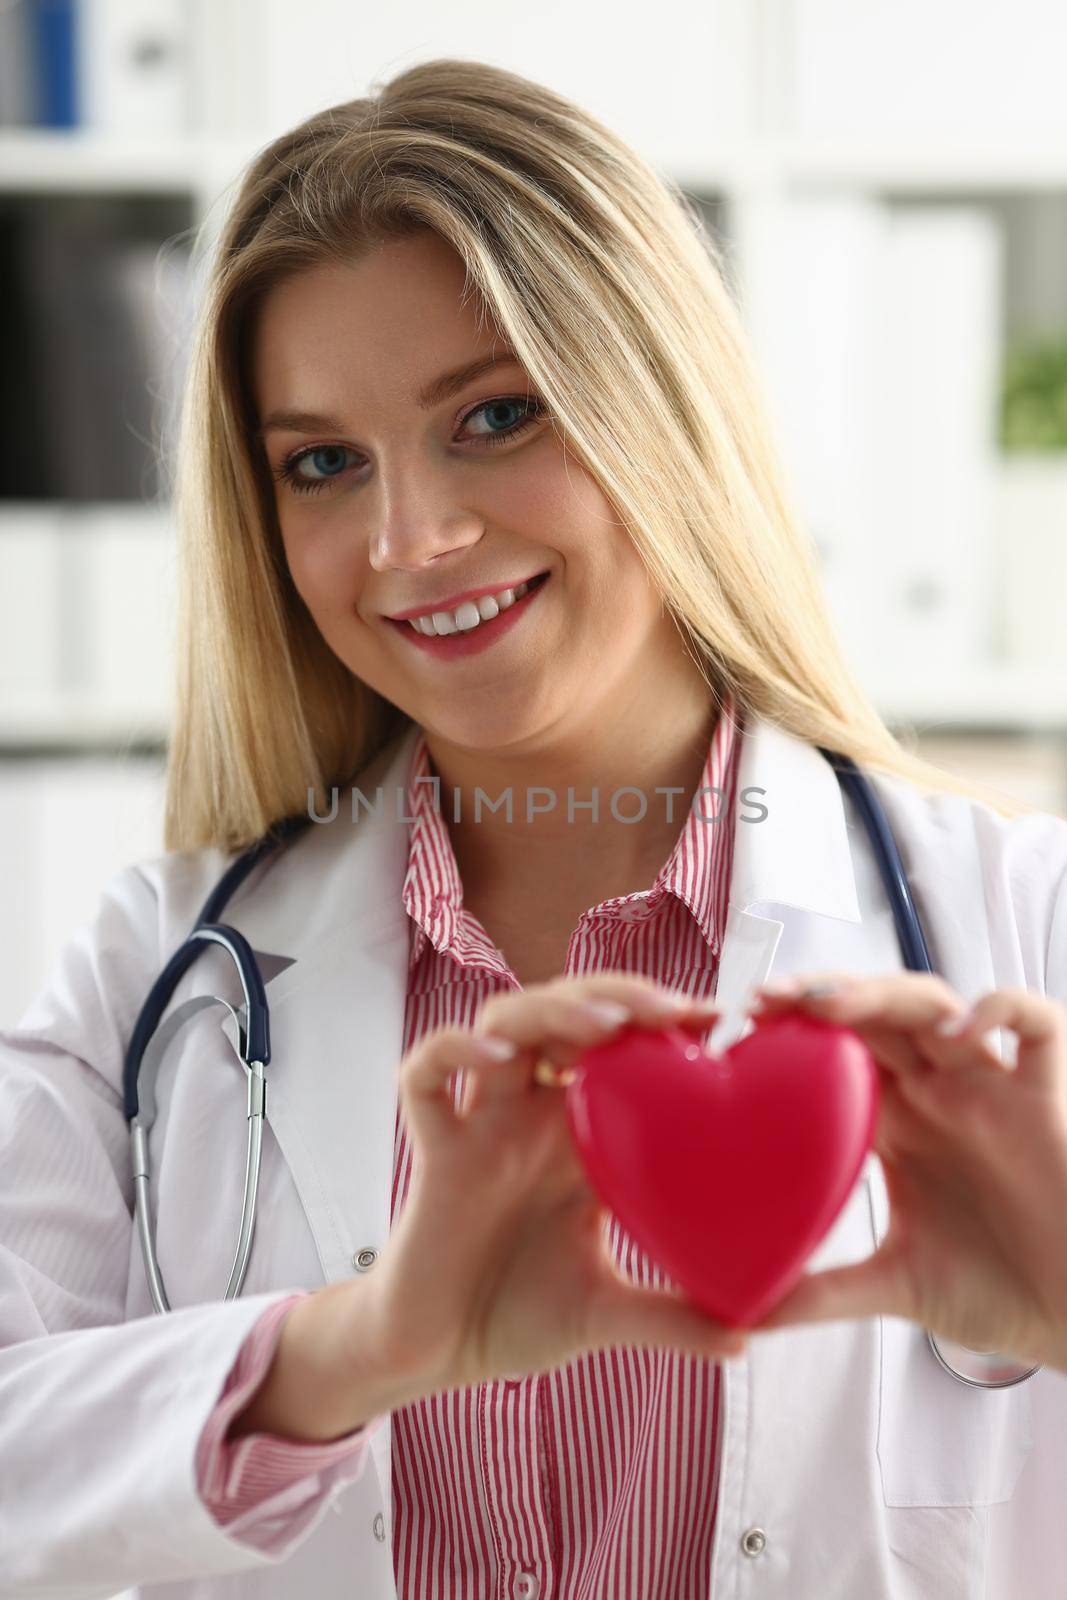 Beautiful smiling blond female doctor hold in arms red toy heart closeup. Cardio therapeutist student education CPR 911 life save physician make cardiac physical pulse rate measure arrhythmia